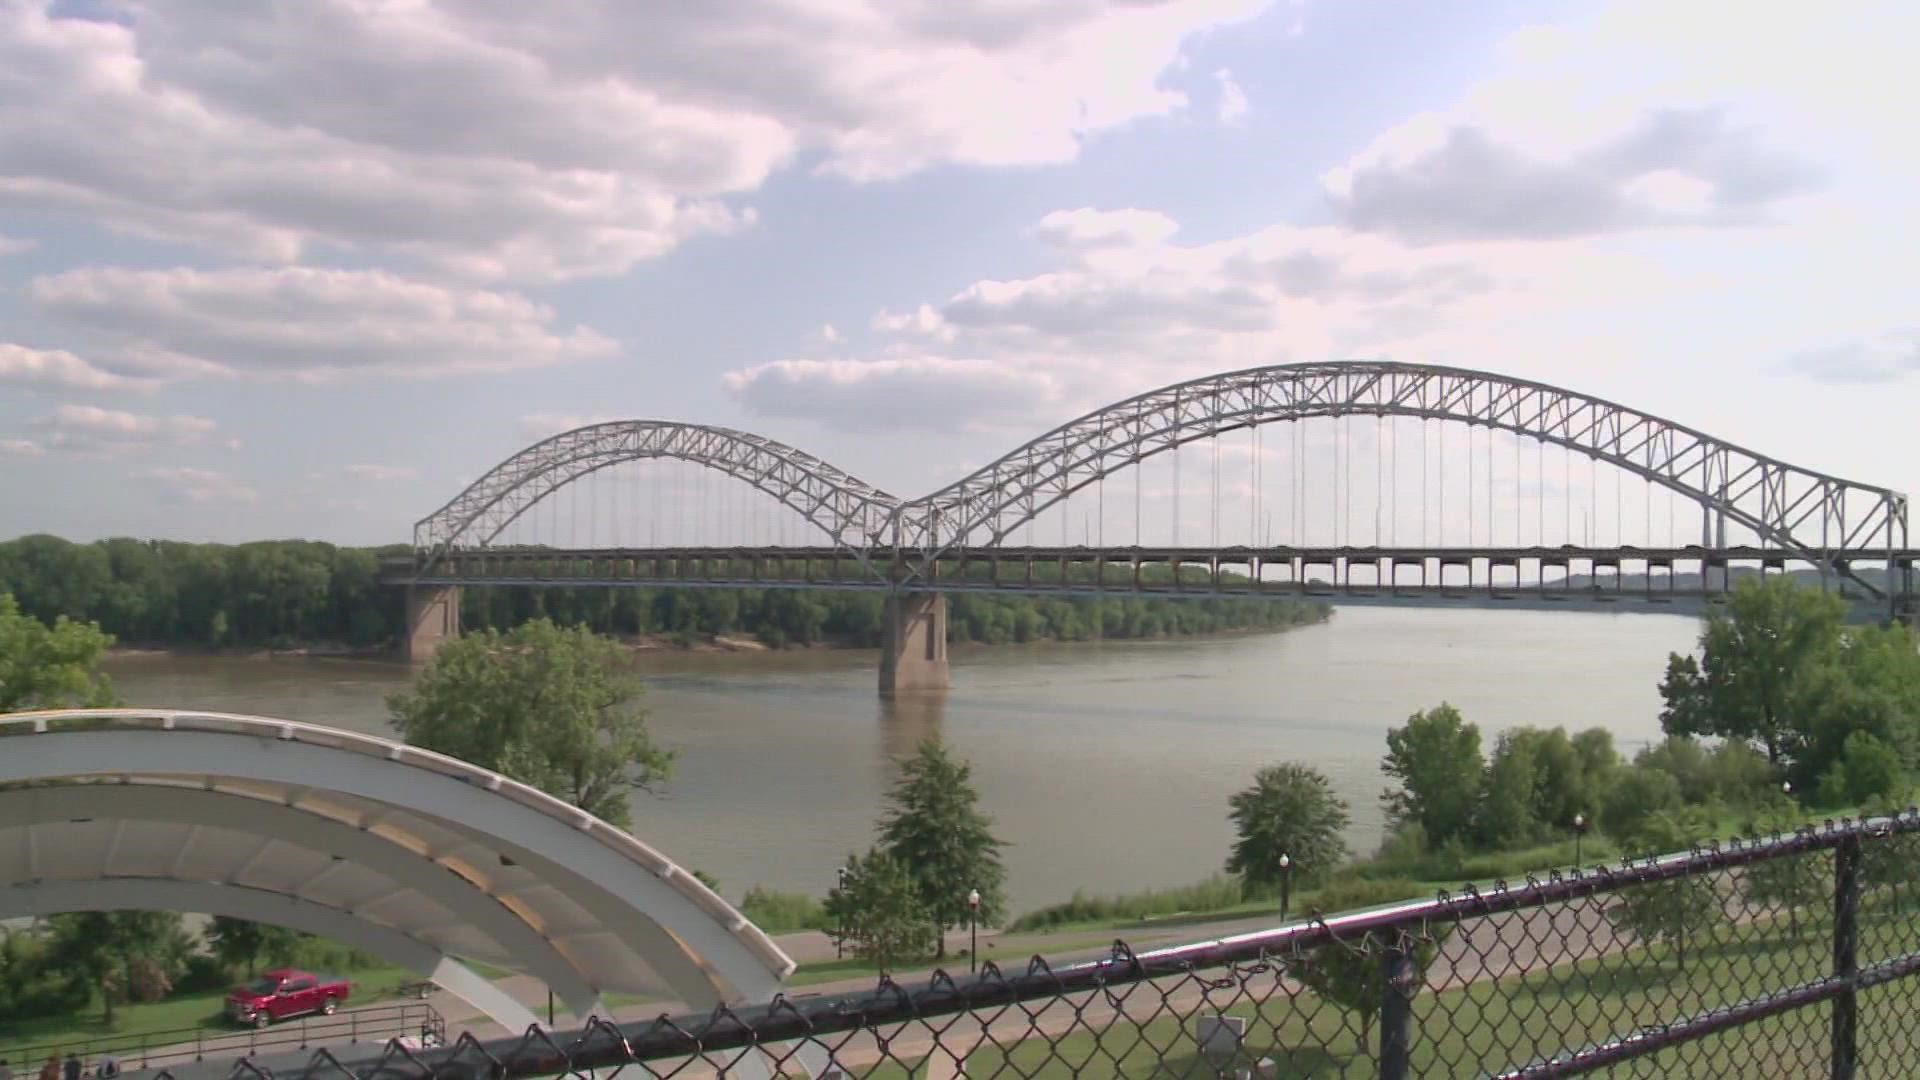 Starting at 10 p.m. Sept. 23, crews are scheduled to close all westbound lanes of I-64 of the Sherman Minton Bridge. The closure is set to last until 6 a.m. Monday.